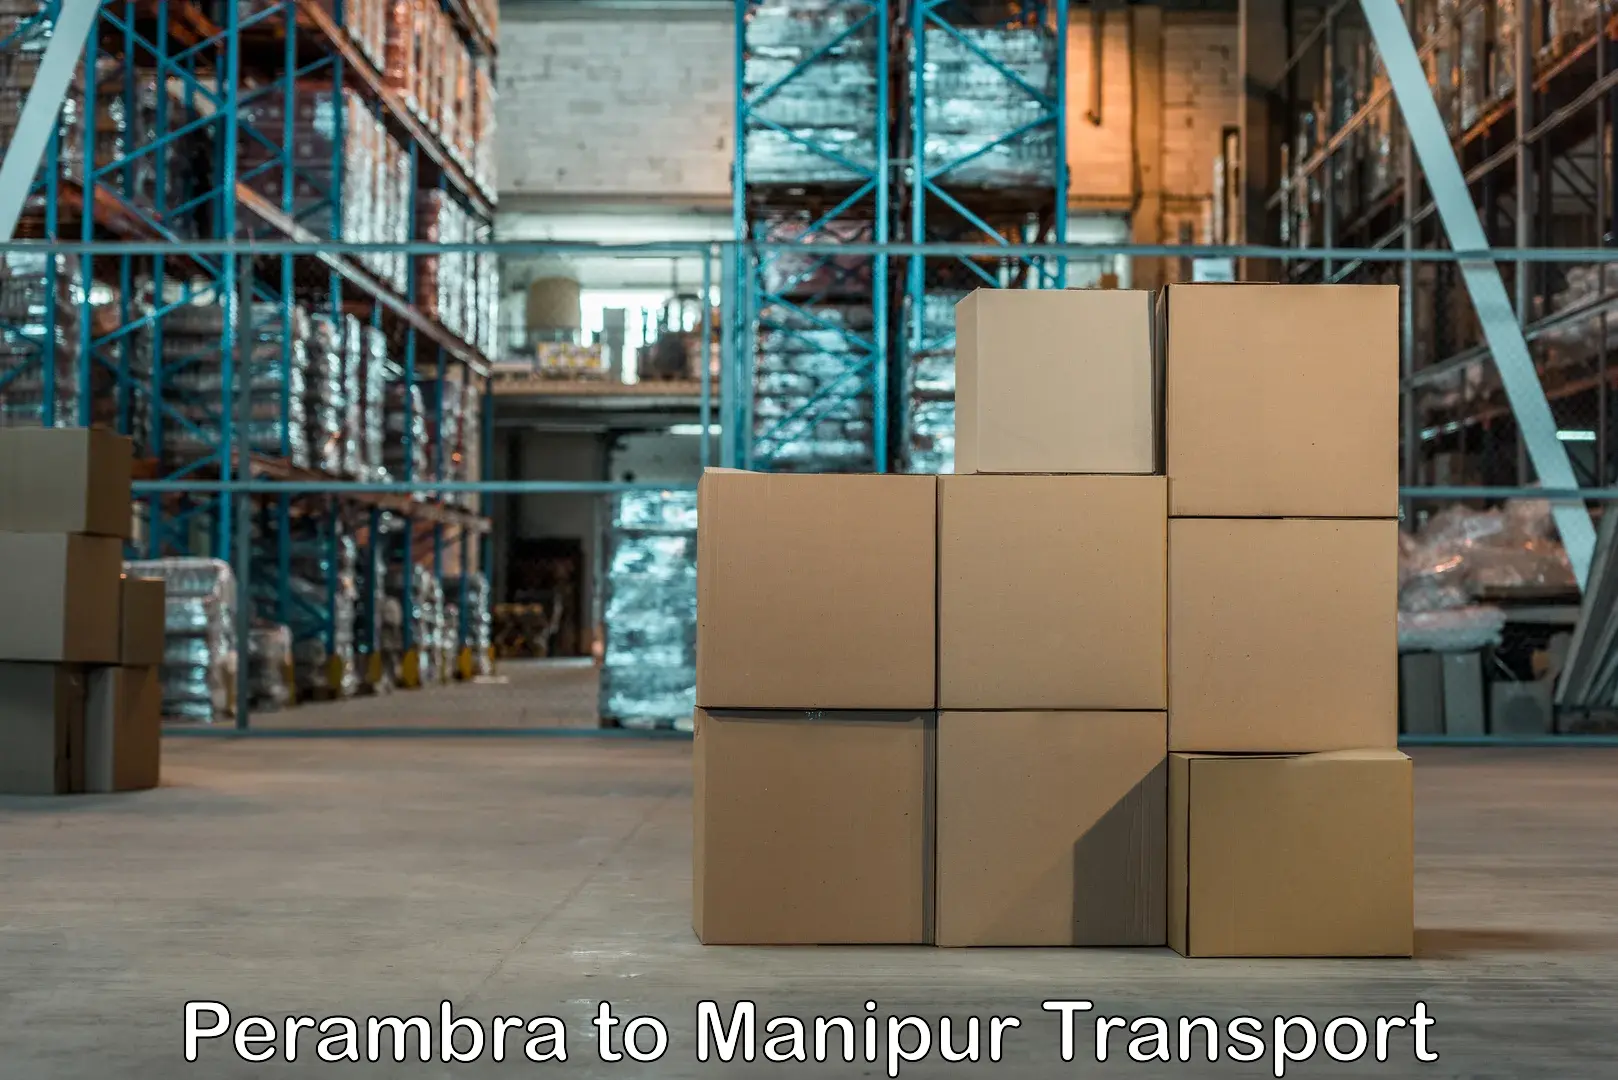 Nearby transport service Perambra to Manipur